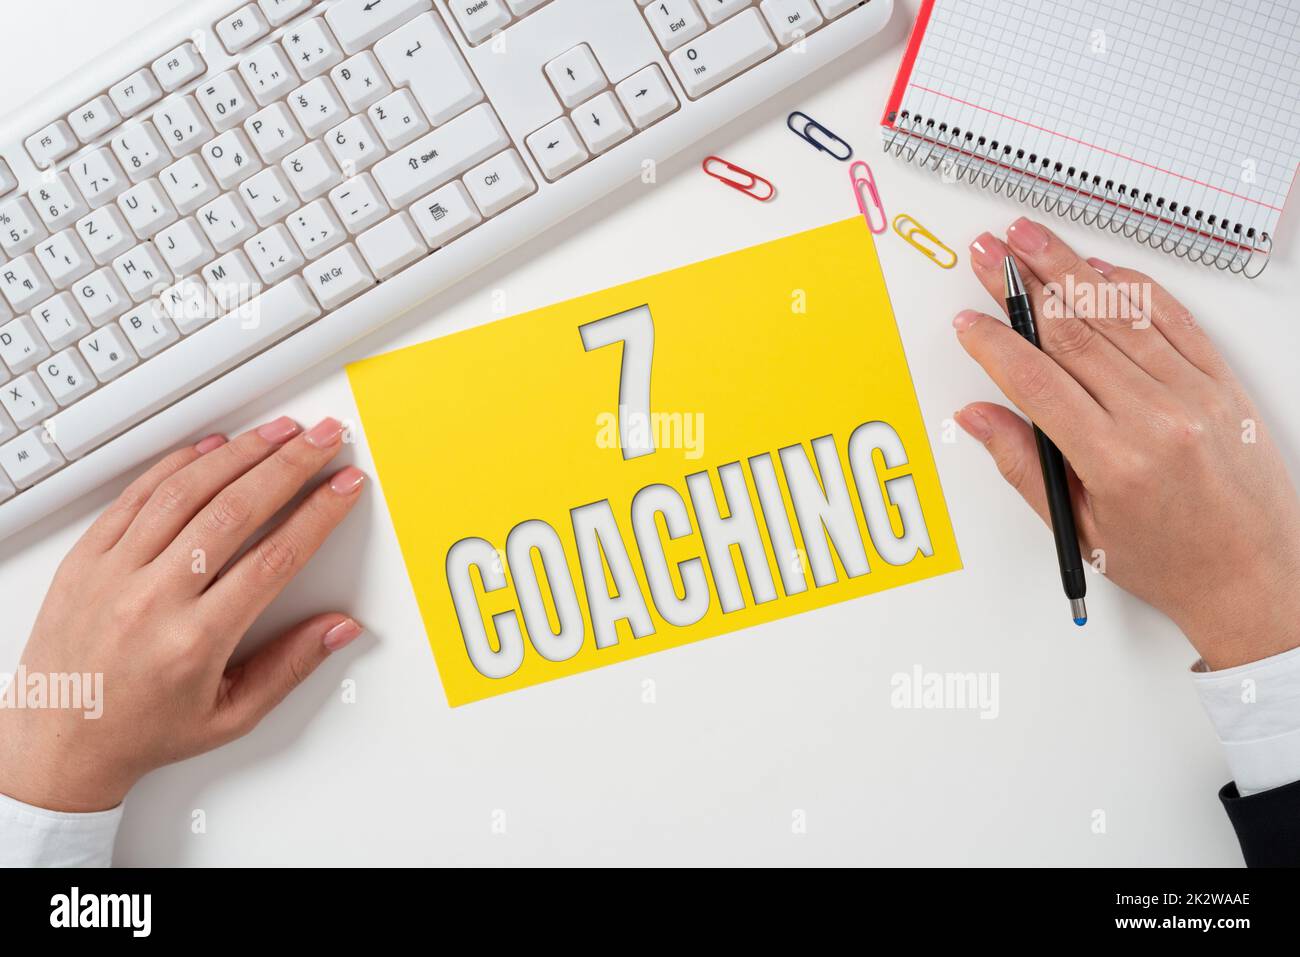 Text caption presenting 7 Coaching. Internet Concept Refers to a number of figures regarding business to be succesful -47942 Stock Photo